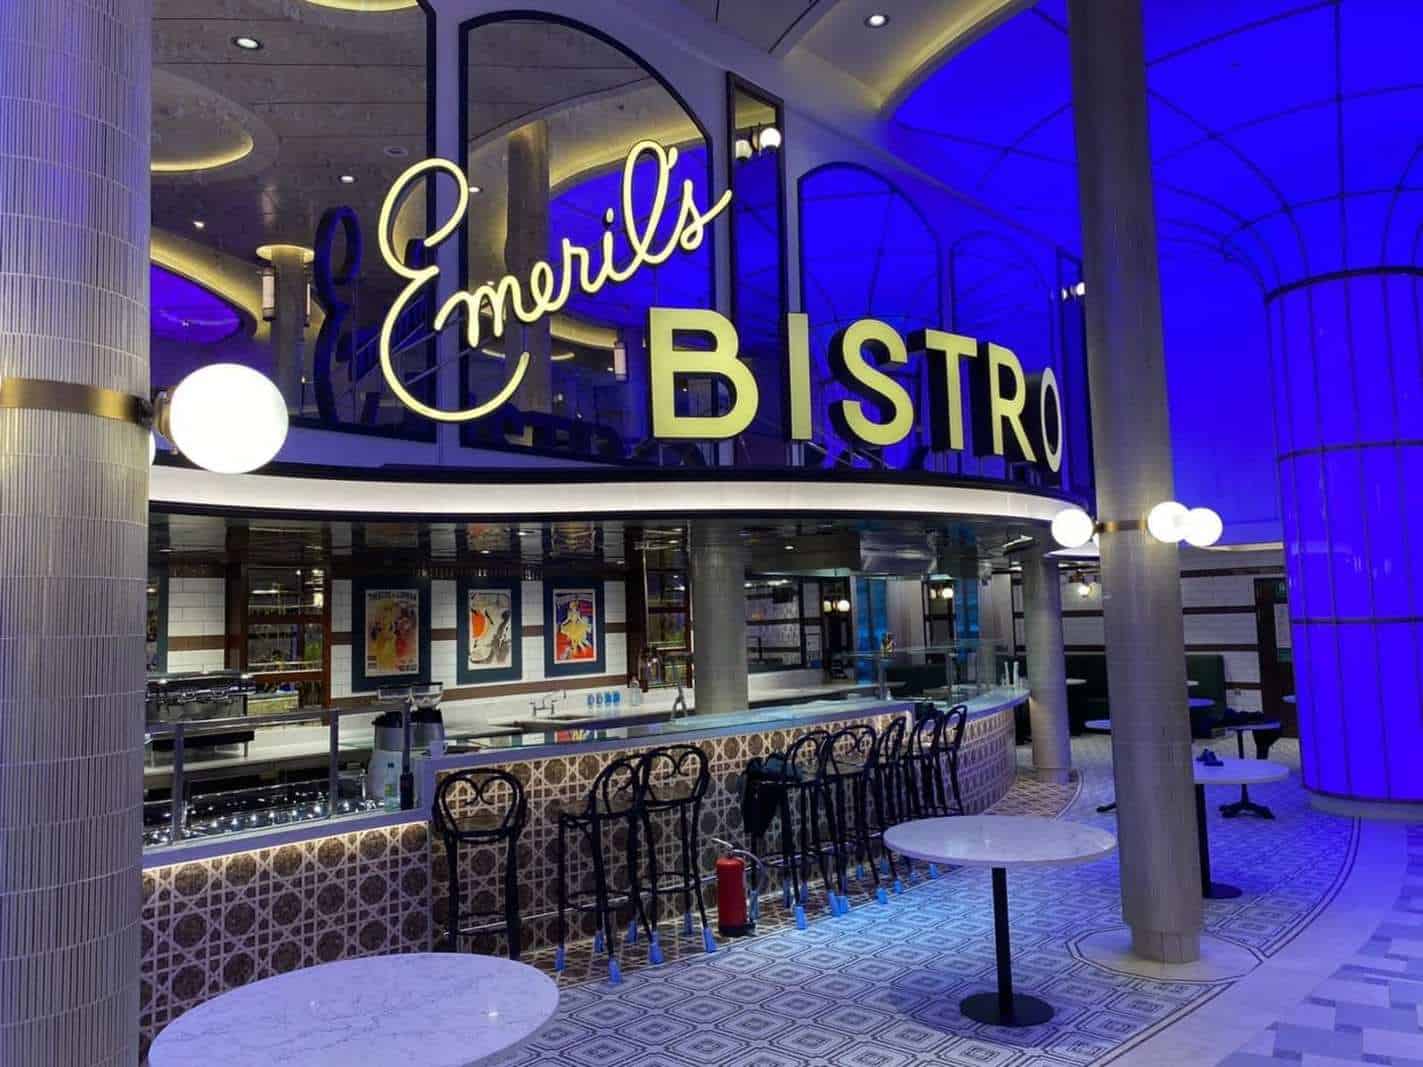 Emeril Lagasse's first restaurant on a cruise ship, Emeril's Bistro.